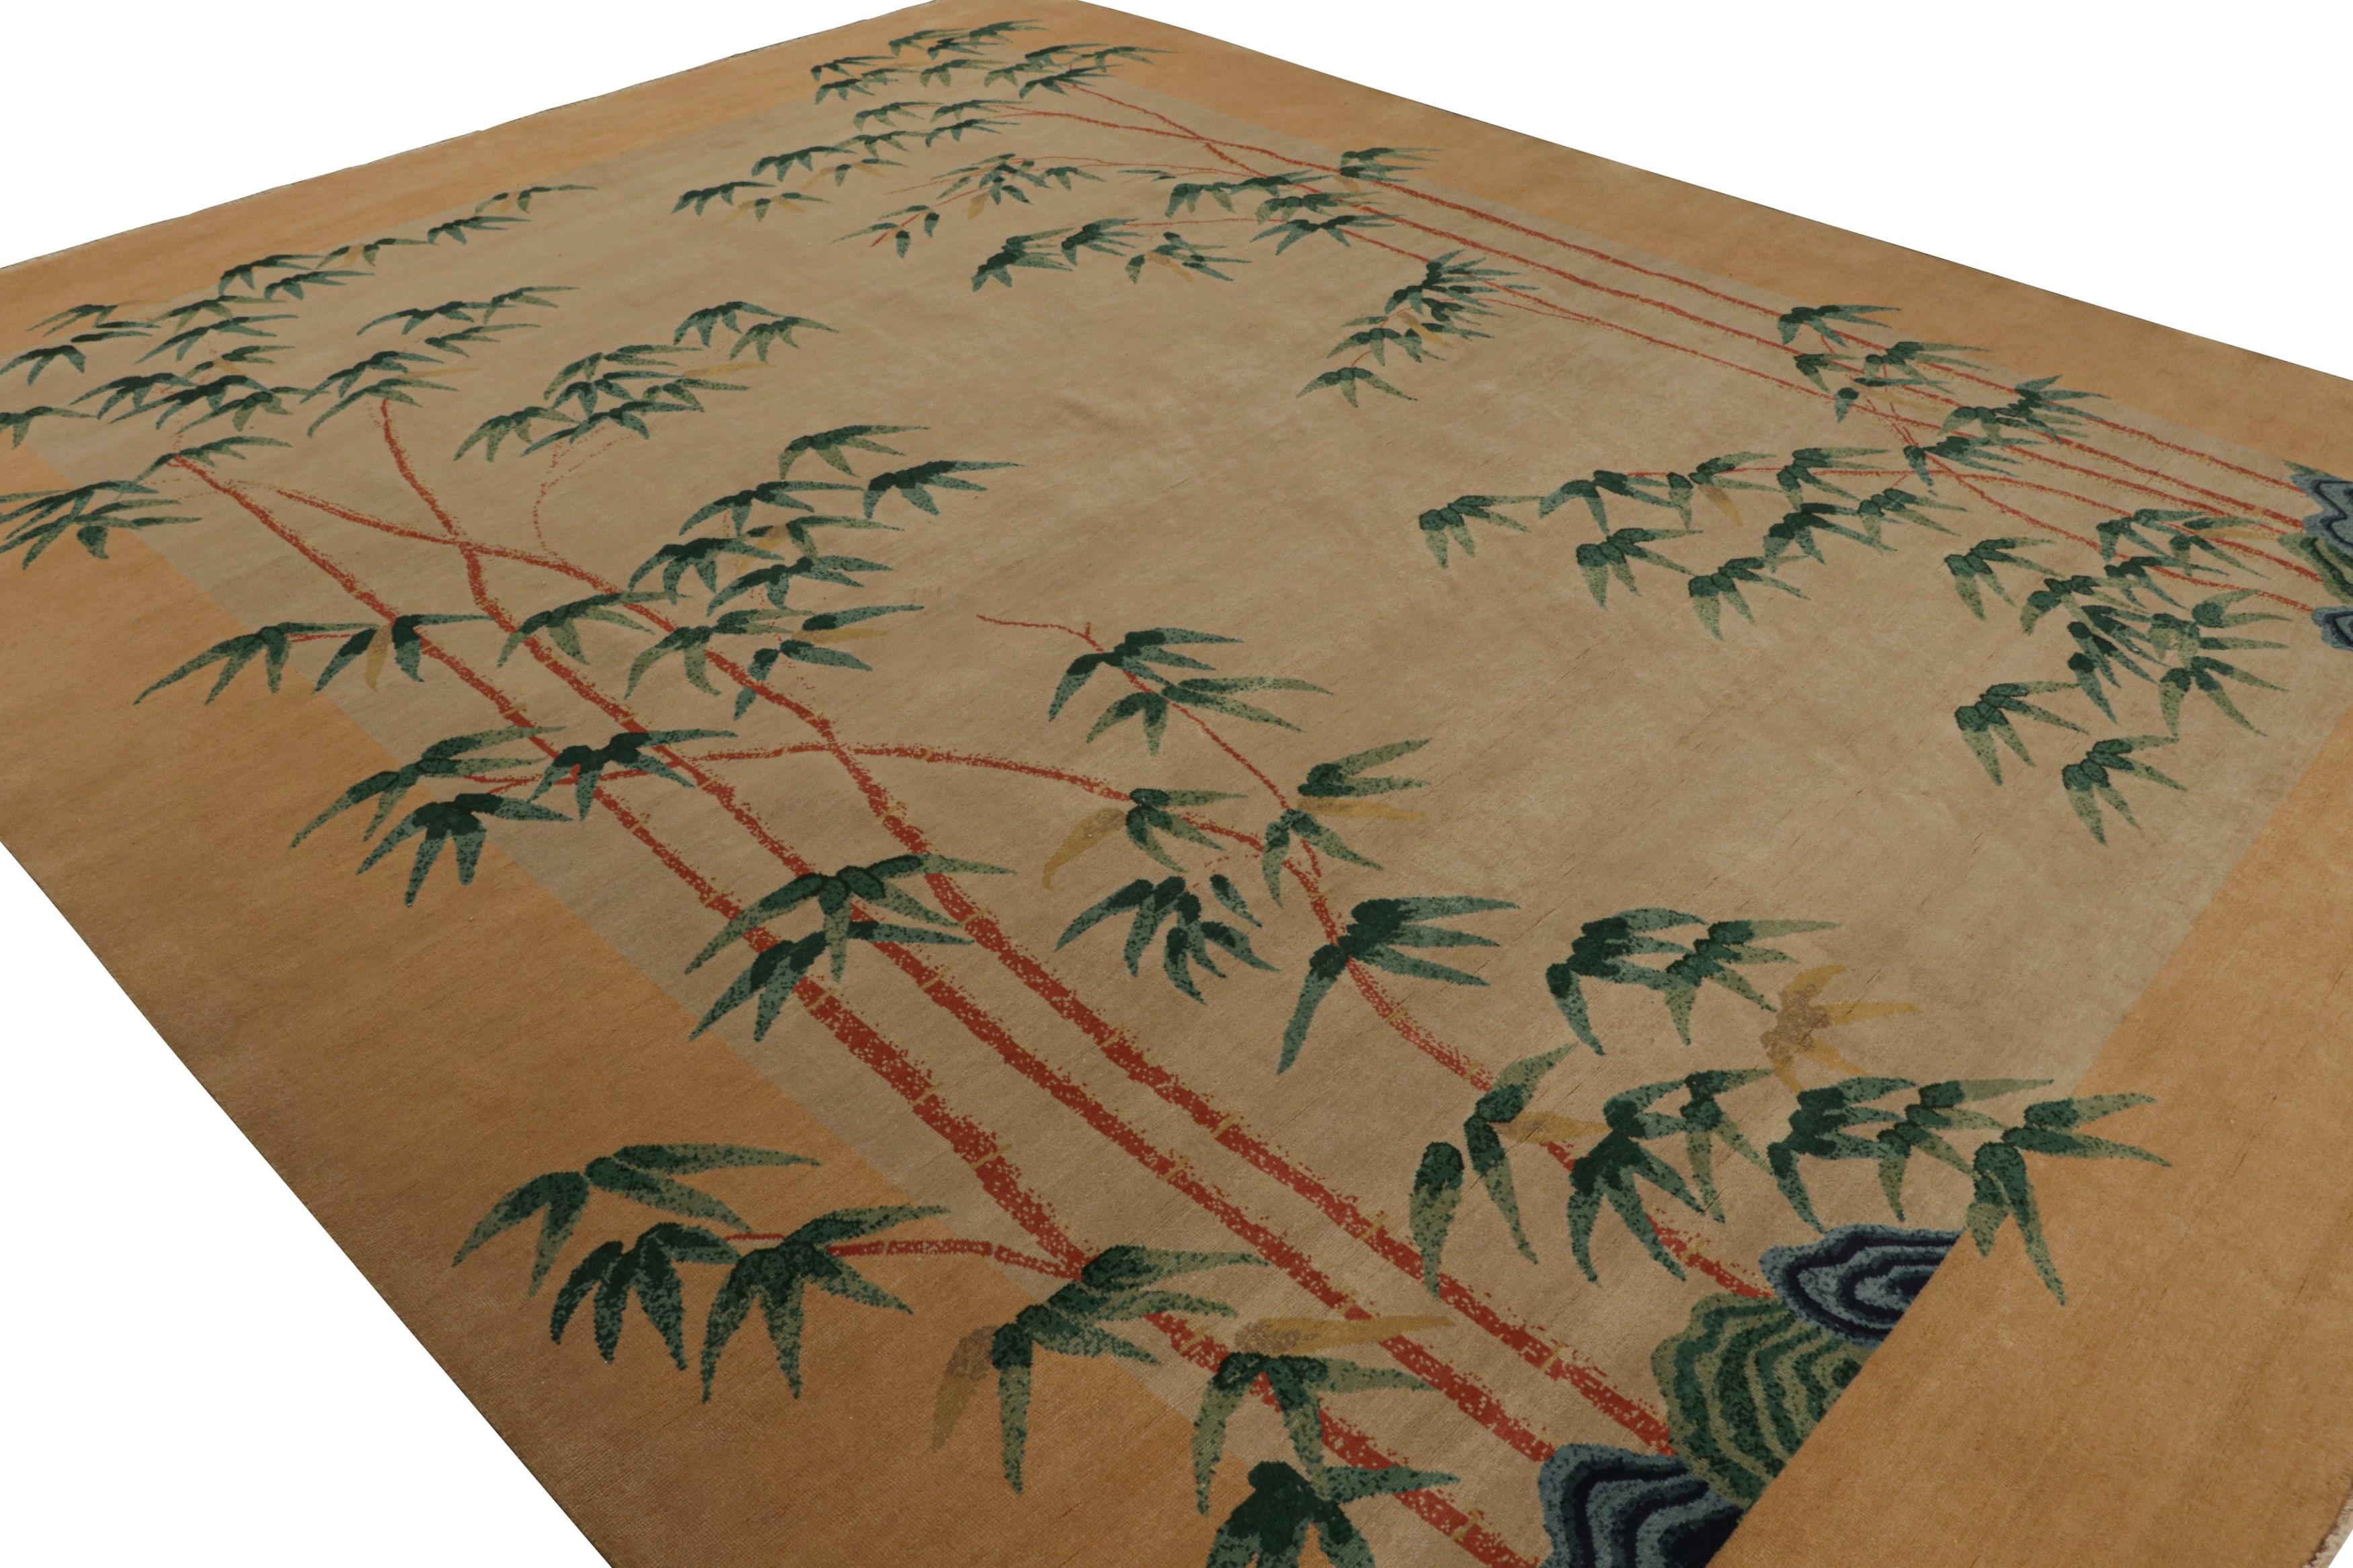 With a minimalist floral pattern inspired by a rare botanical design with bamboo trees in green and blue, on a beige field and gold border, this 12x15 Chinese Art Deco rug is hand-knotted in wool. 

On the Design: 

Connoisseurs will appreciate the